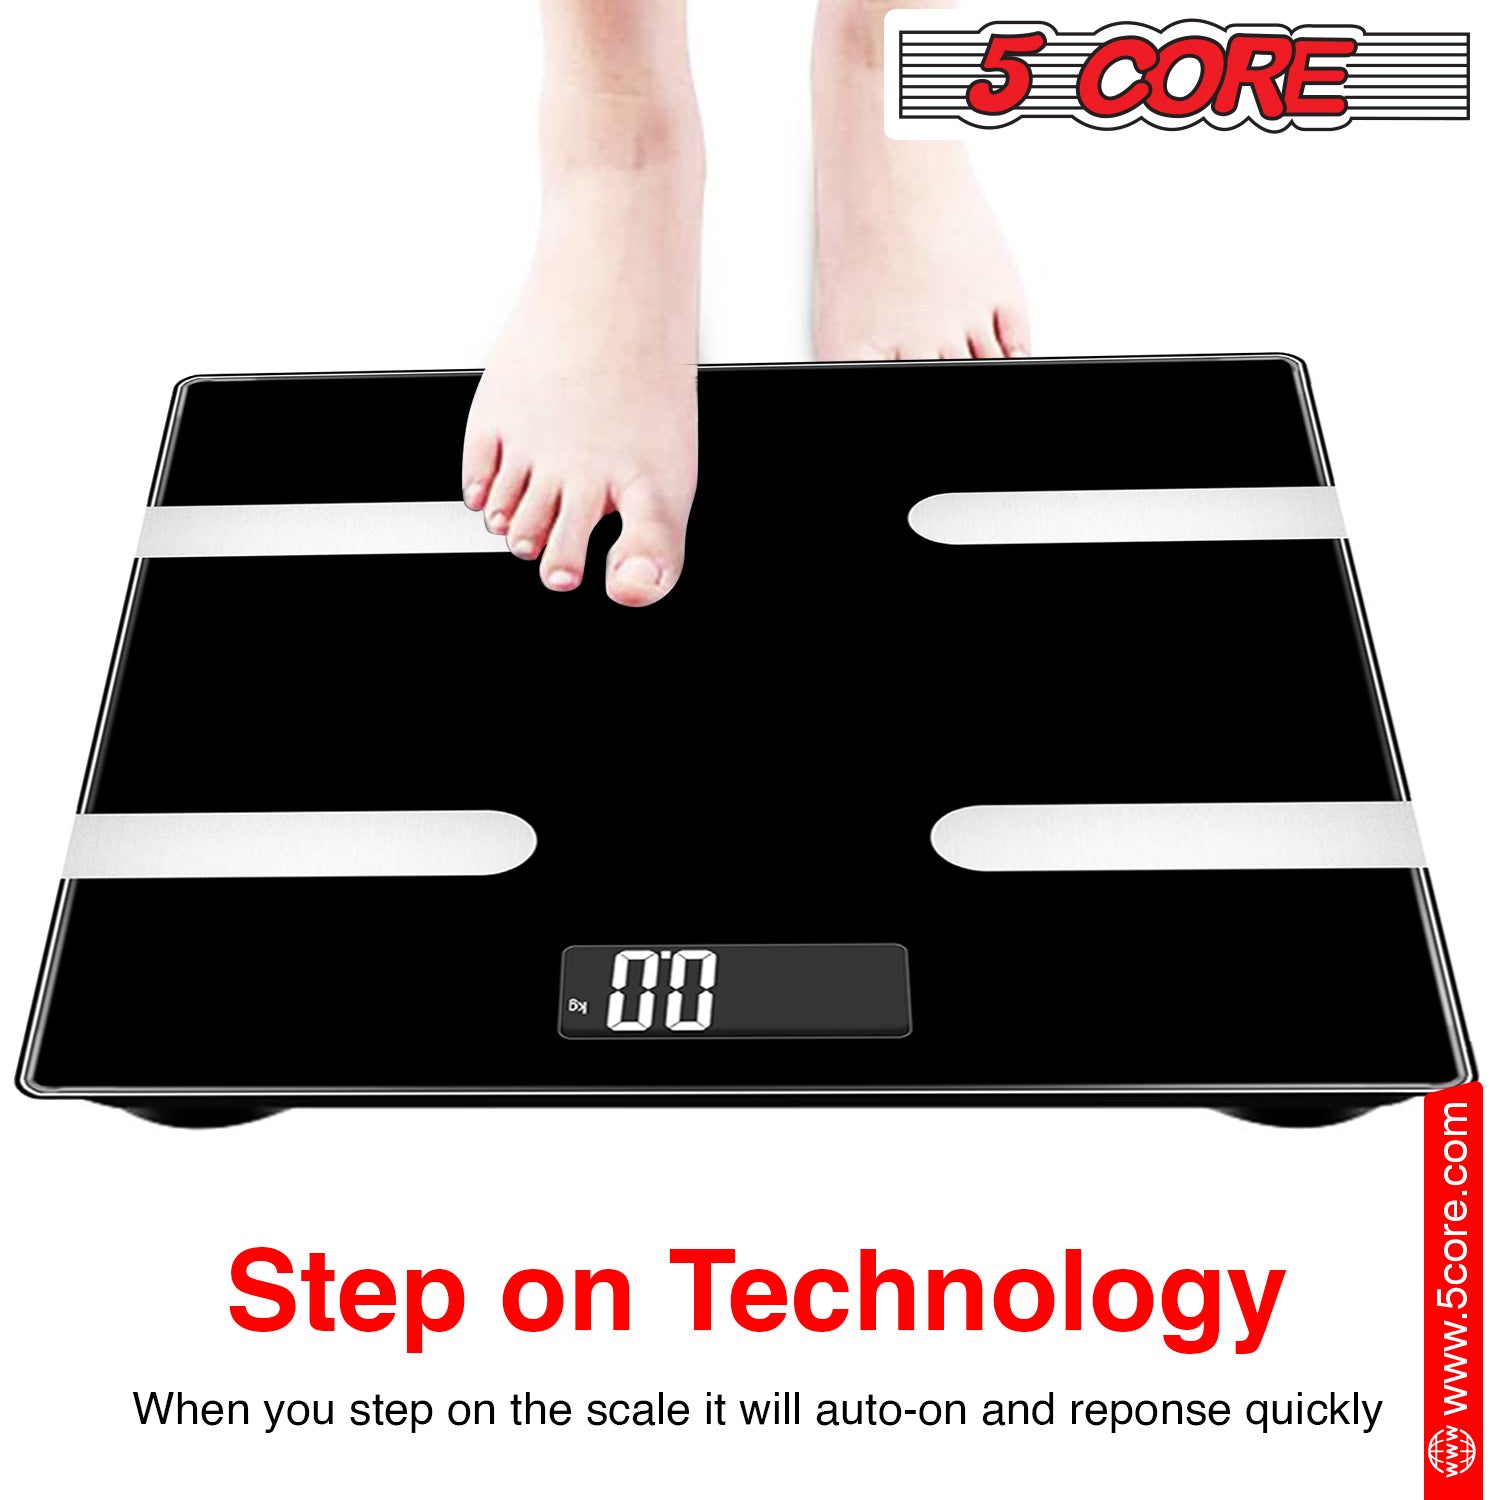 5 Core Weight Smart Scale for Body Weight Digital Bathroom Scale BMI Weighing Bluetooth Body Fat Monitor Health Analyzer Sync with App -BBS HL B BLK